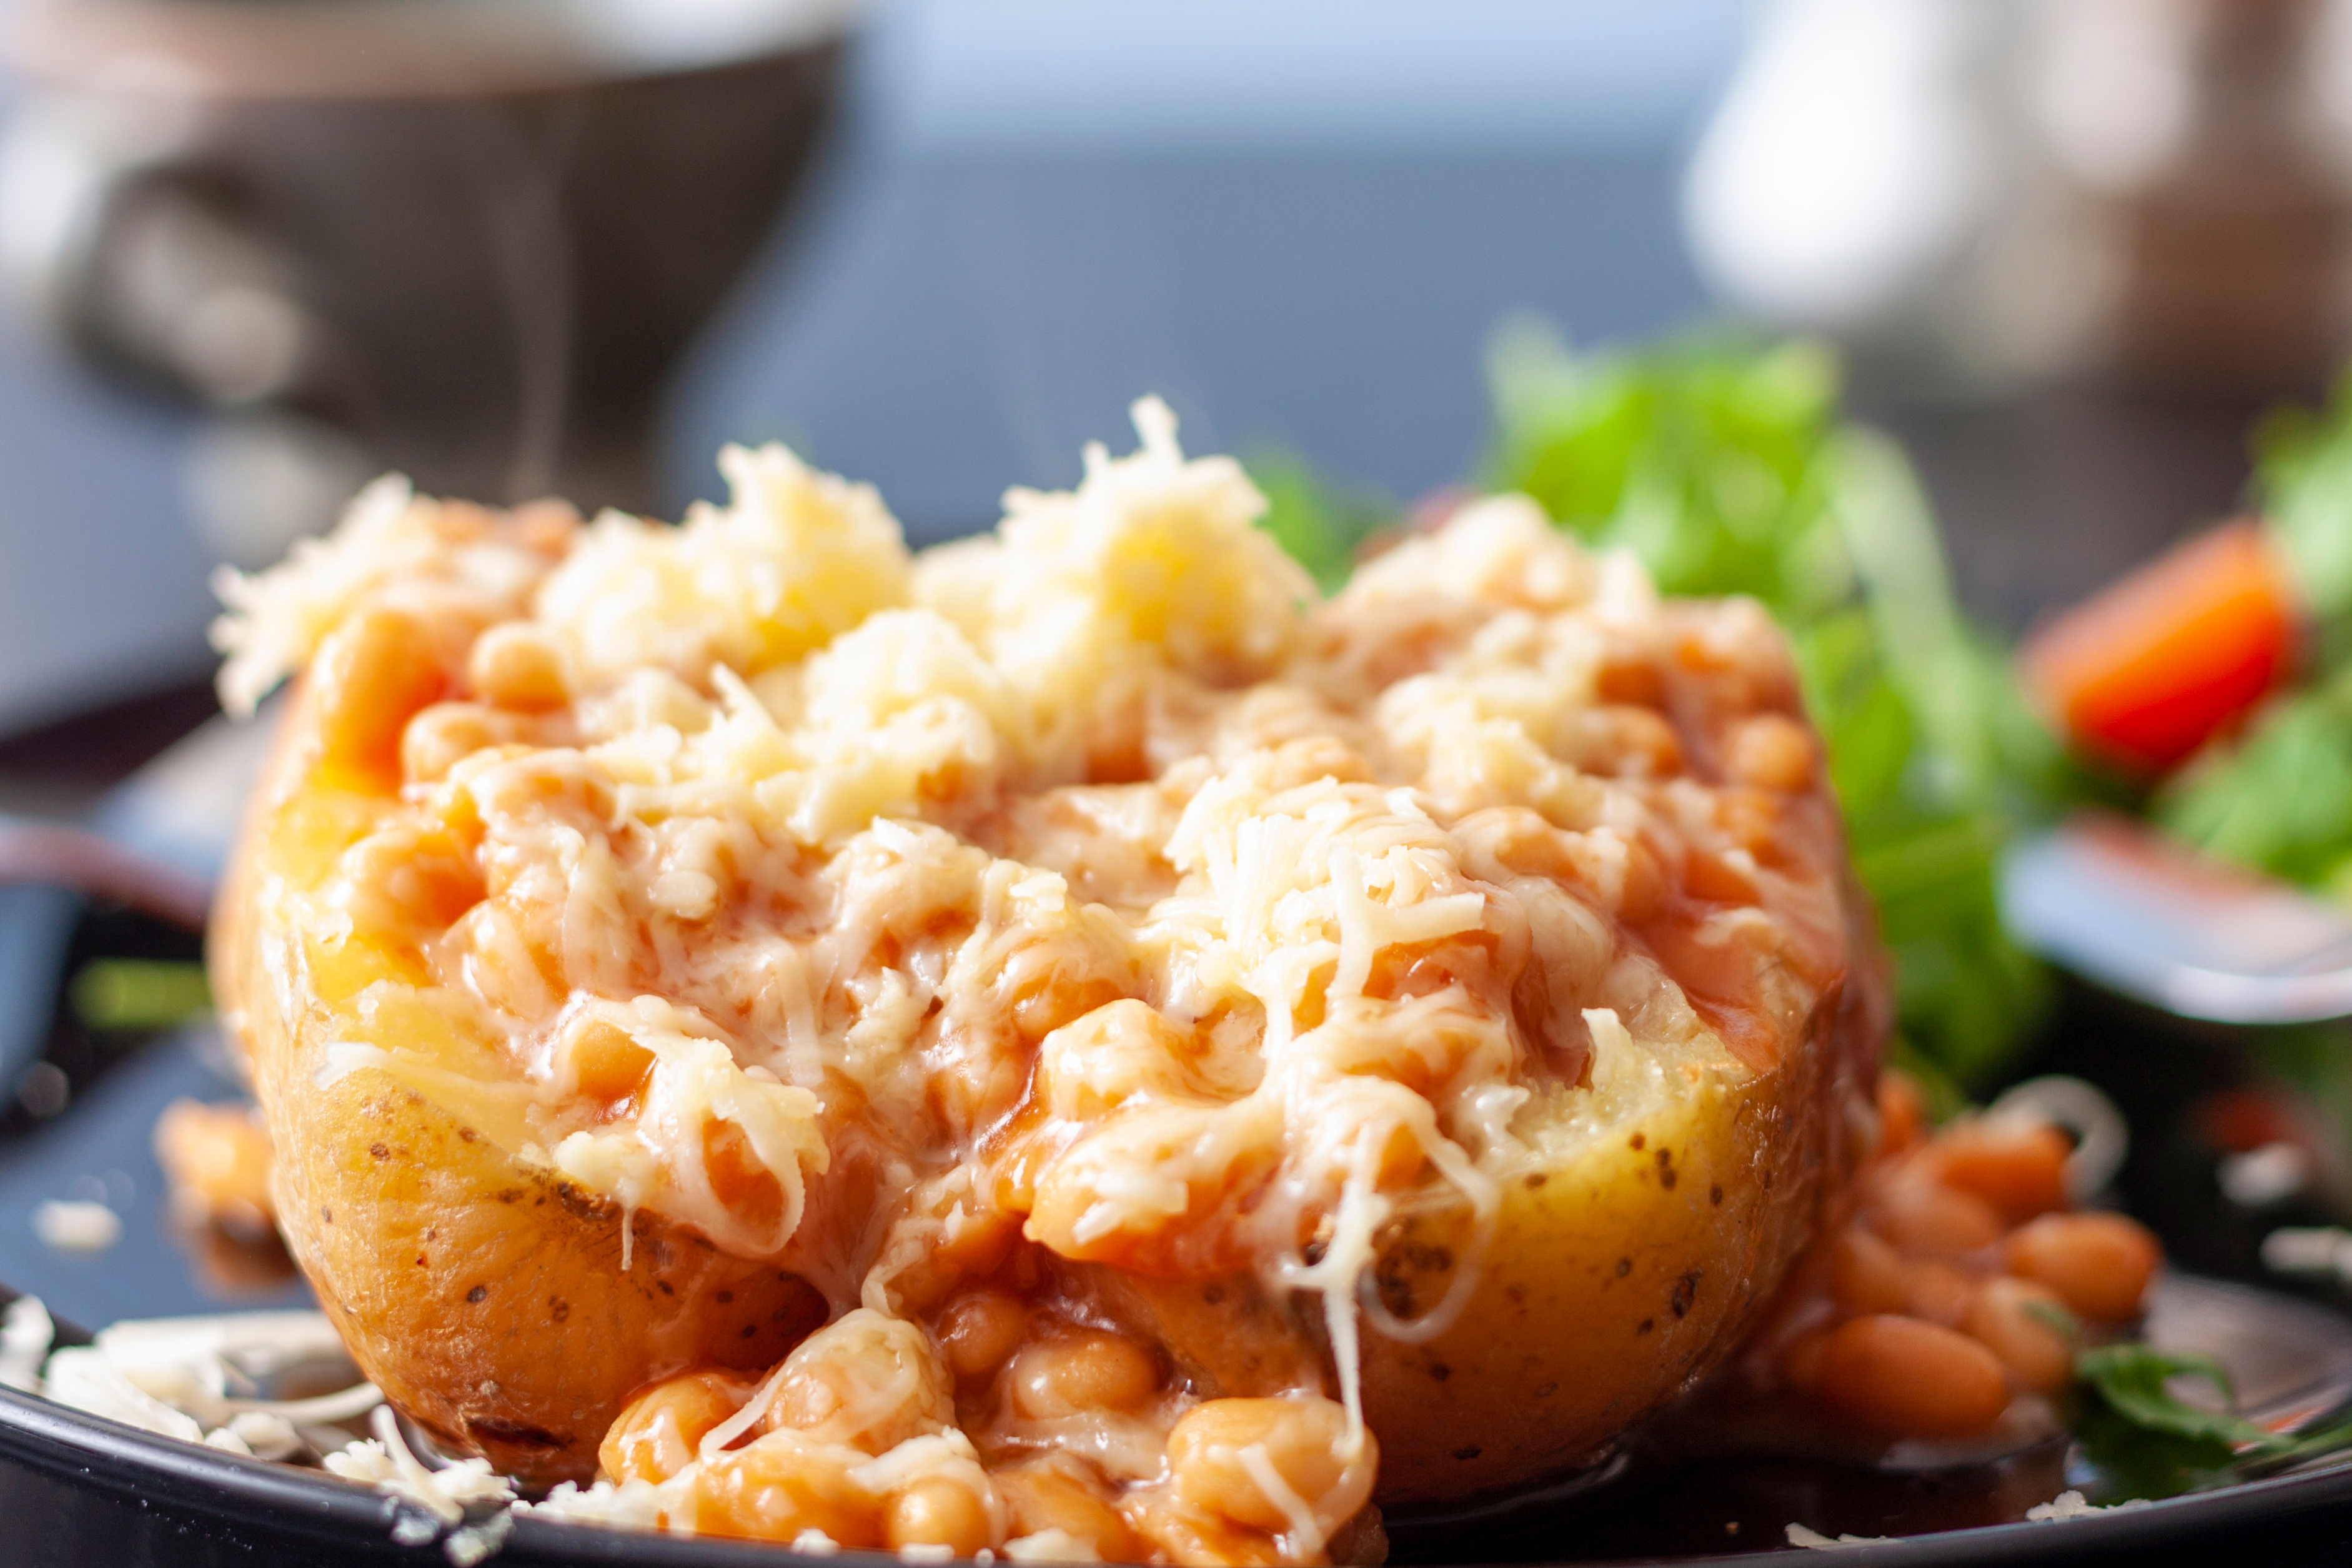 Baked potato with beans and cheese